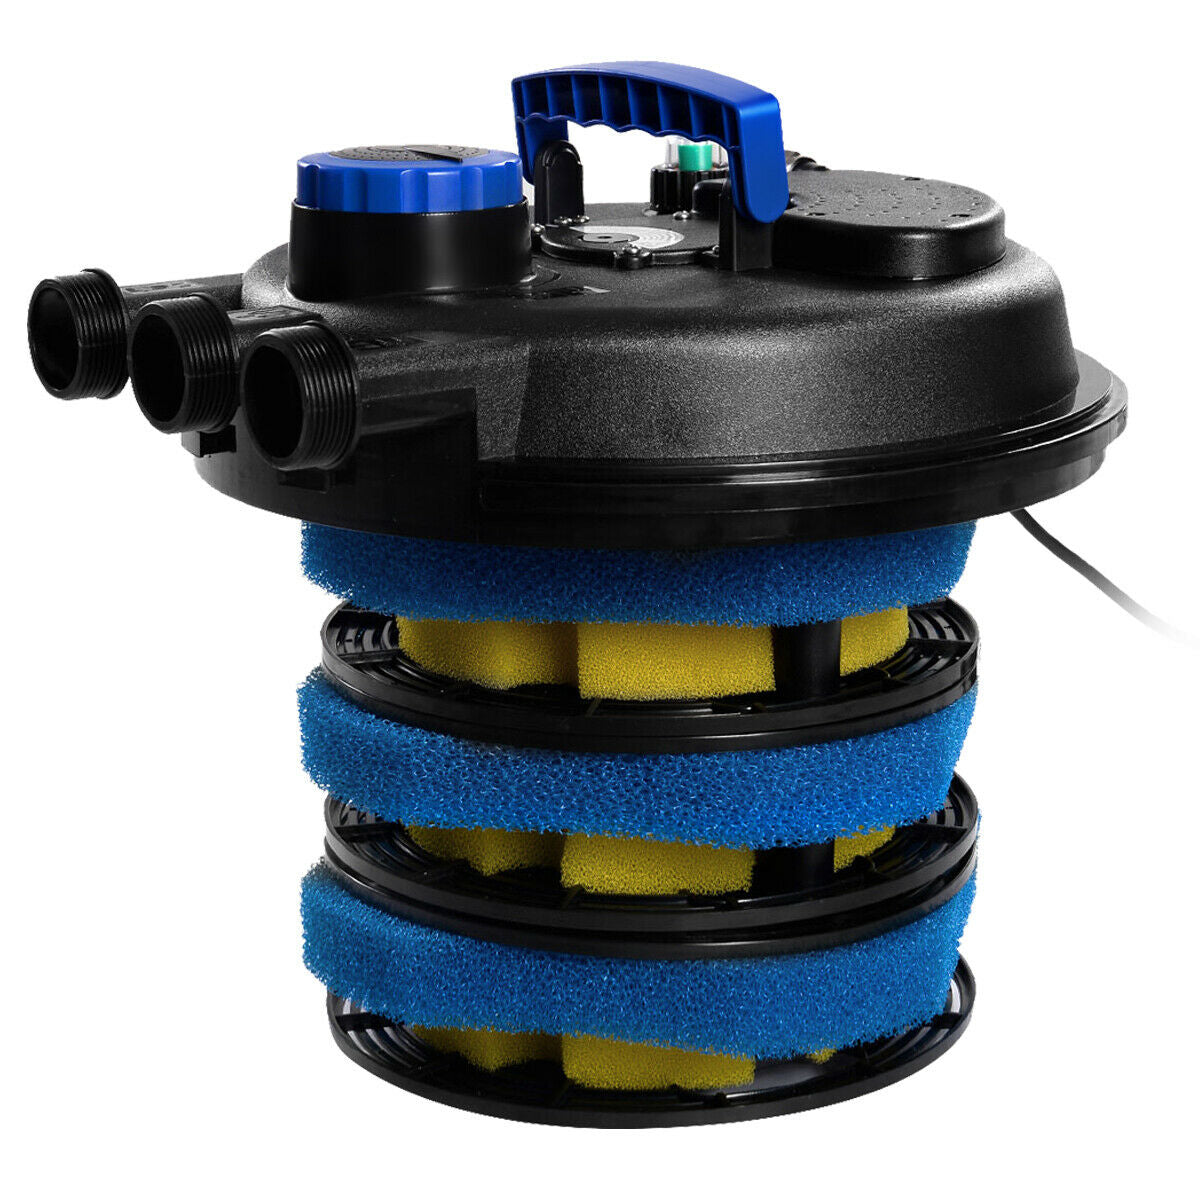 4 Filter Sponges and Cleaning Indicator: Ensuring balanced water flow. The sponges have different densities (yellow and blue) for improved filtration efficiency. Additionally, a floating indicator alerts you when the filter requires cleaning.